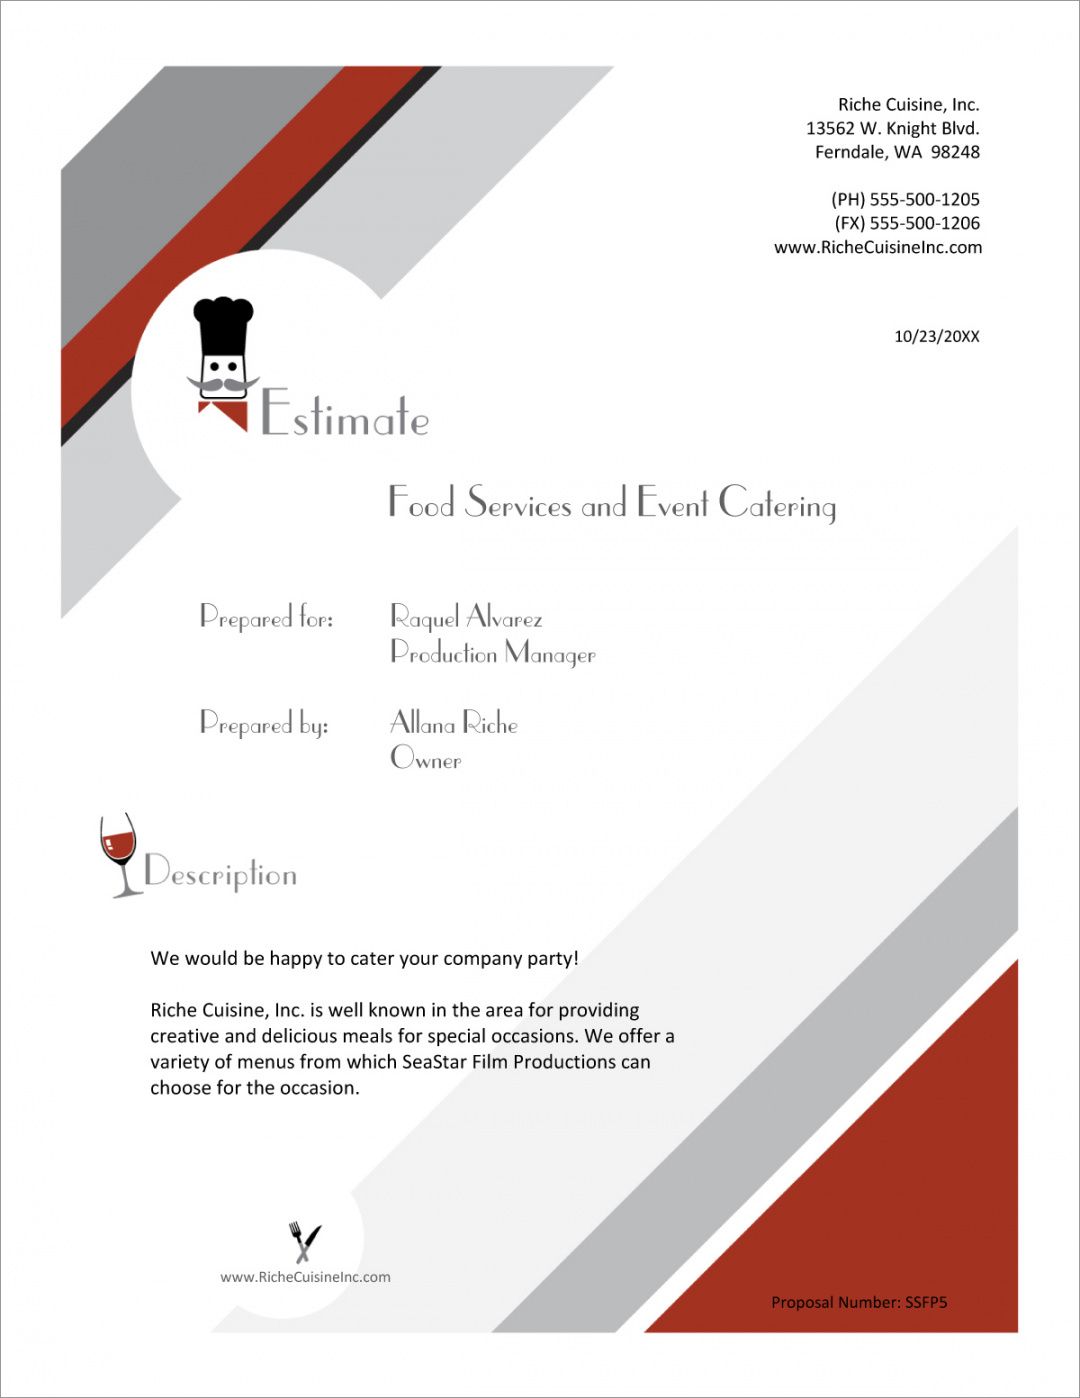 sample food services catering sample proposal  5 steps catering menu proposal template excel